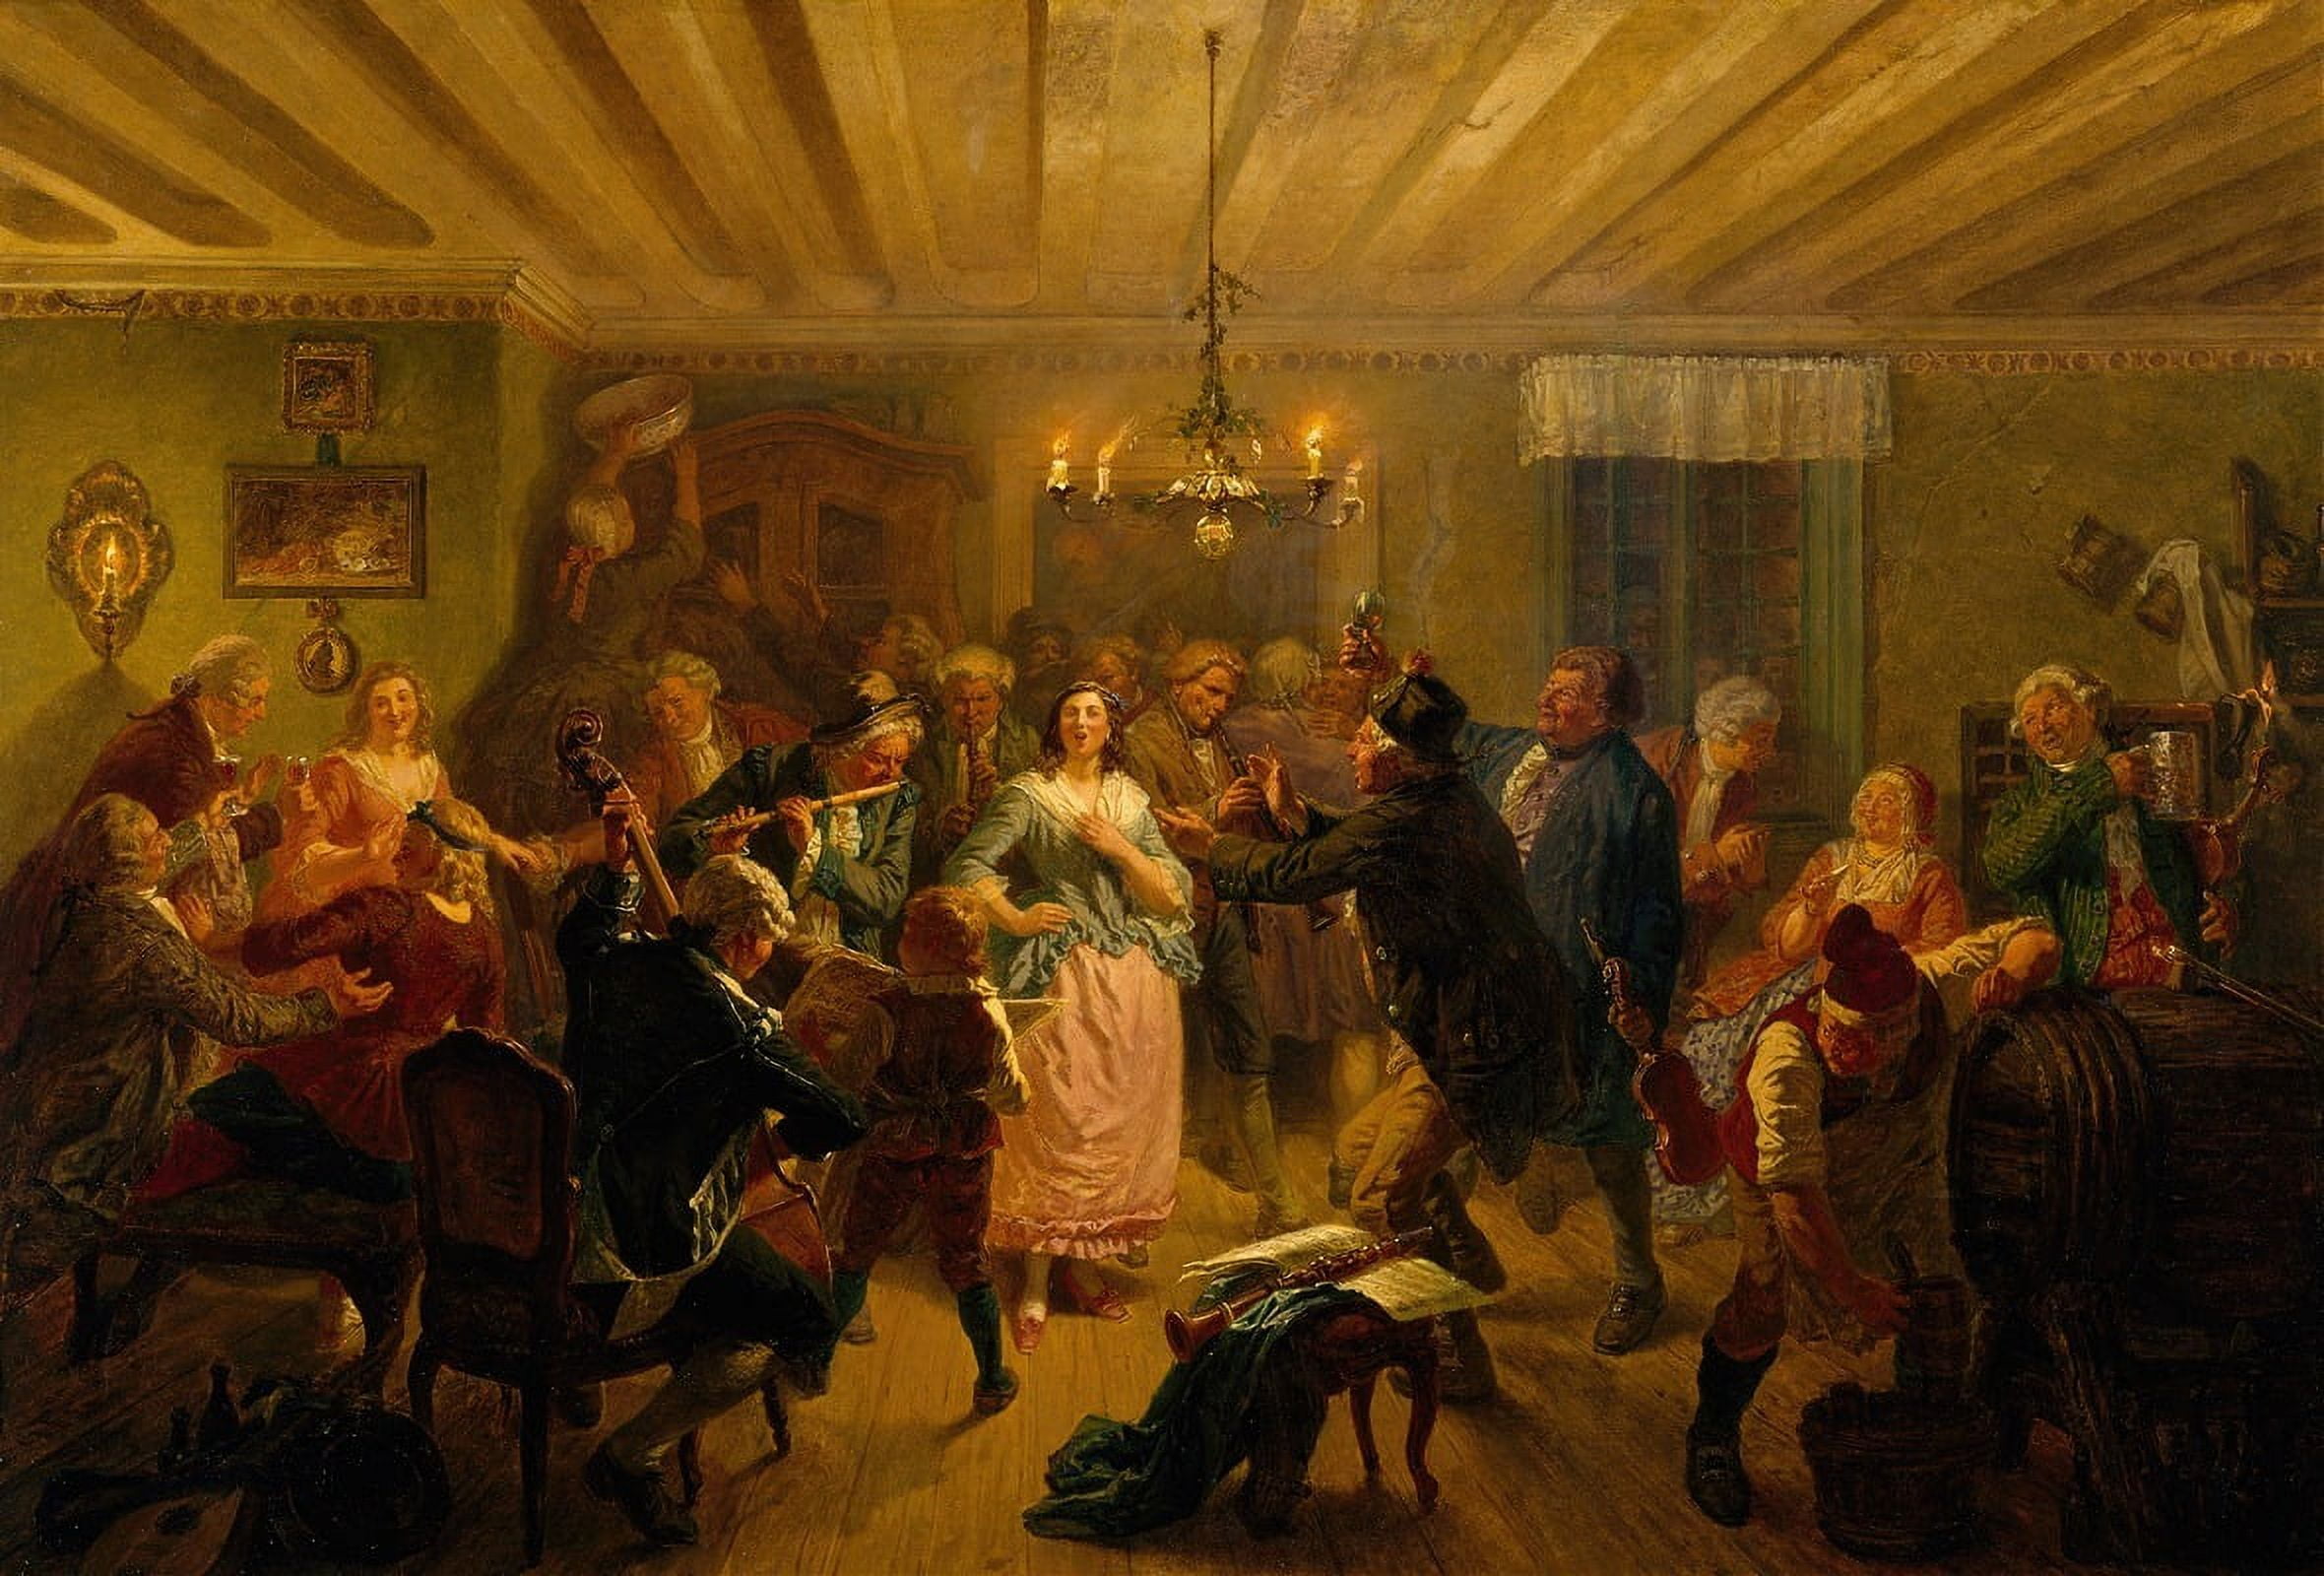 The Concert at Tre Byttor (1860) Poster Print by Wilhelm Wallander (18 ...